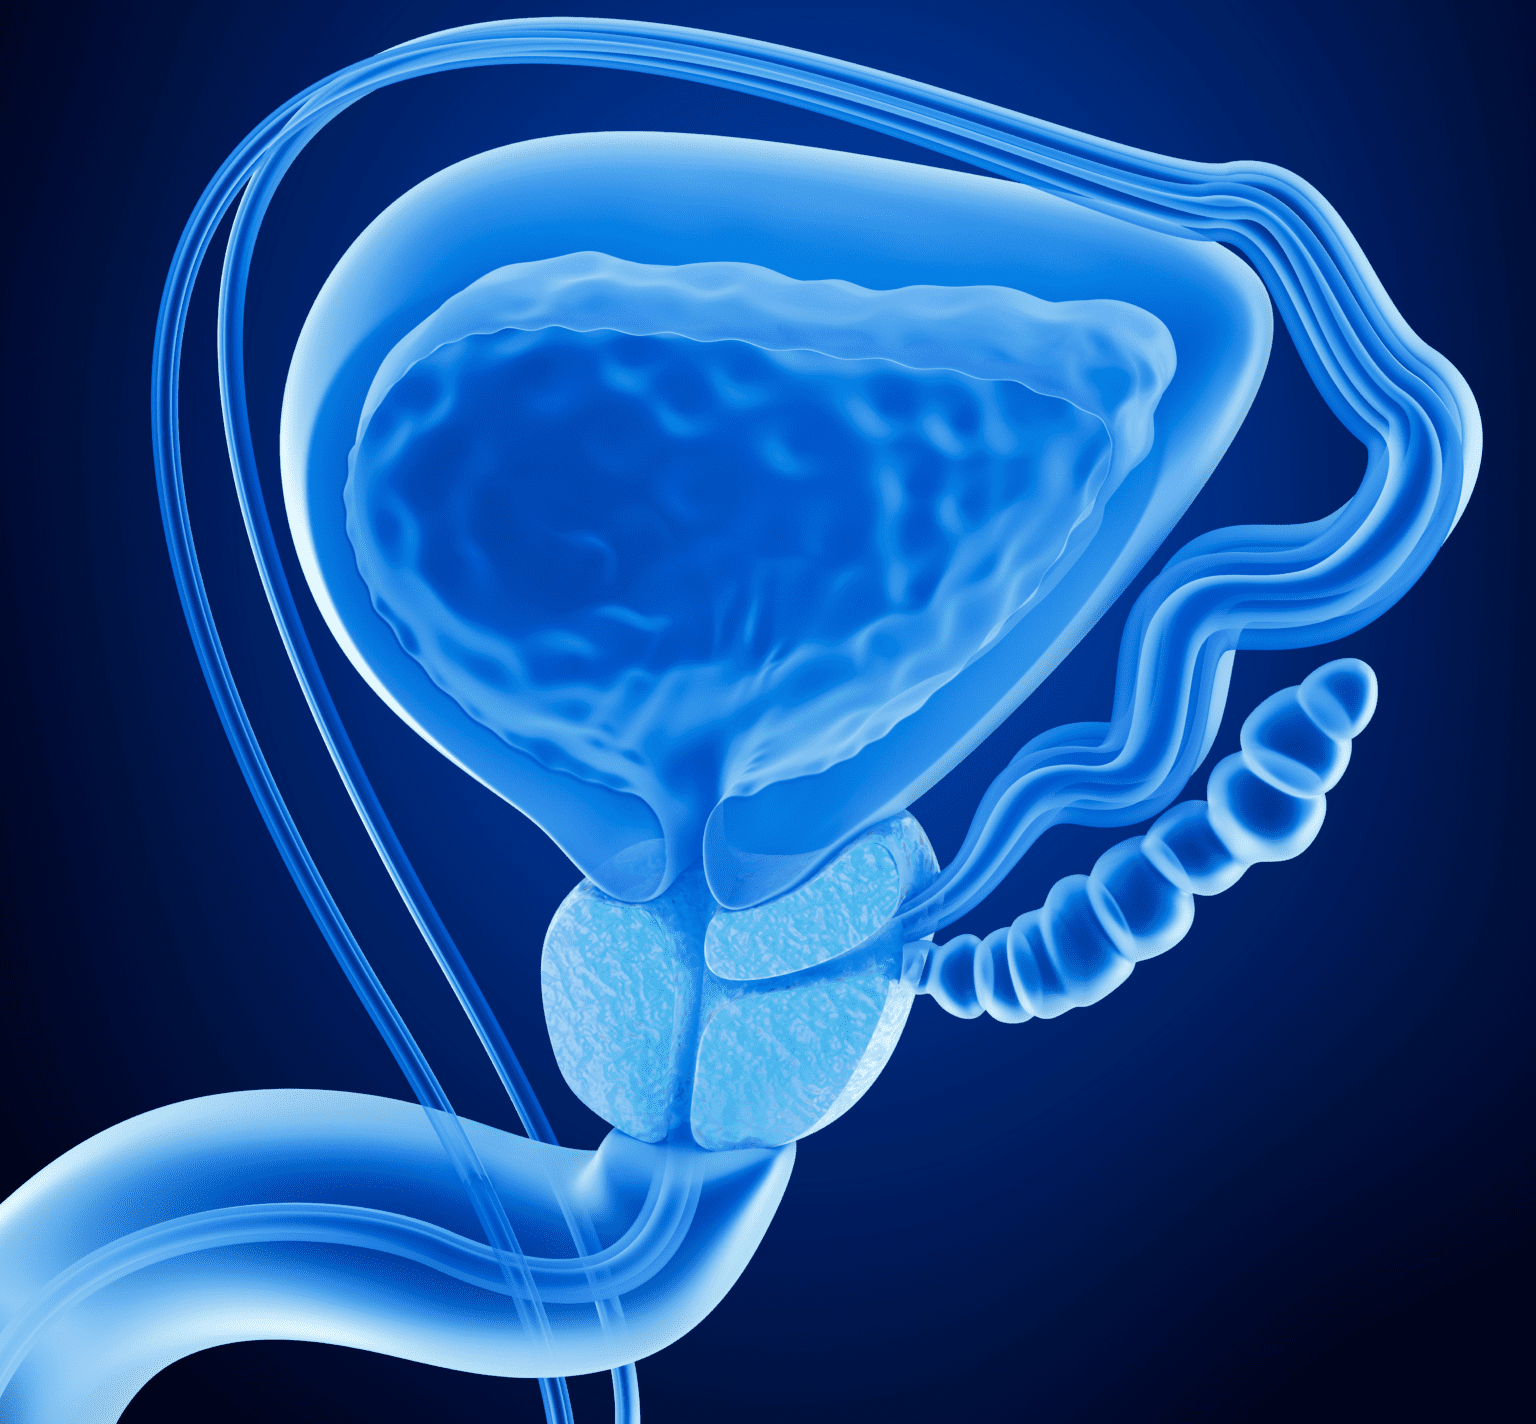 Hereditary Prostate Cancer: What You Need To Know